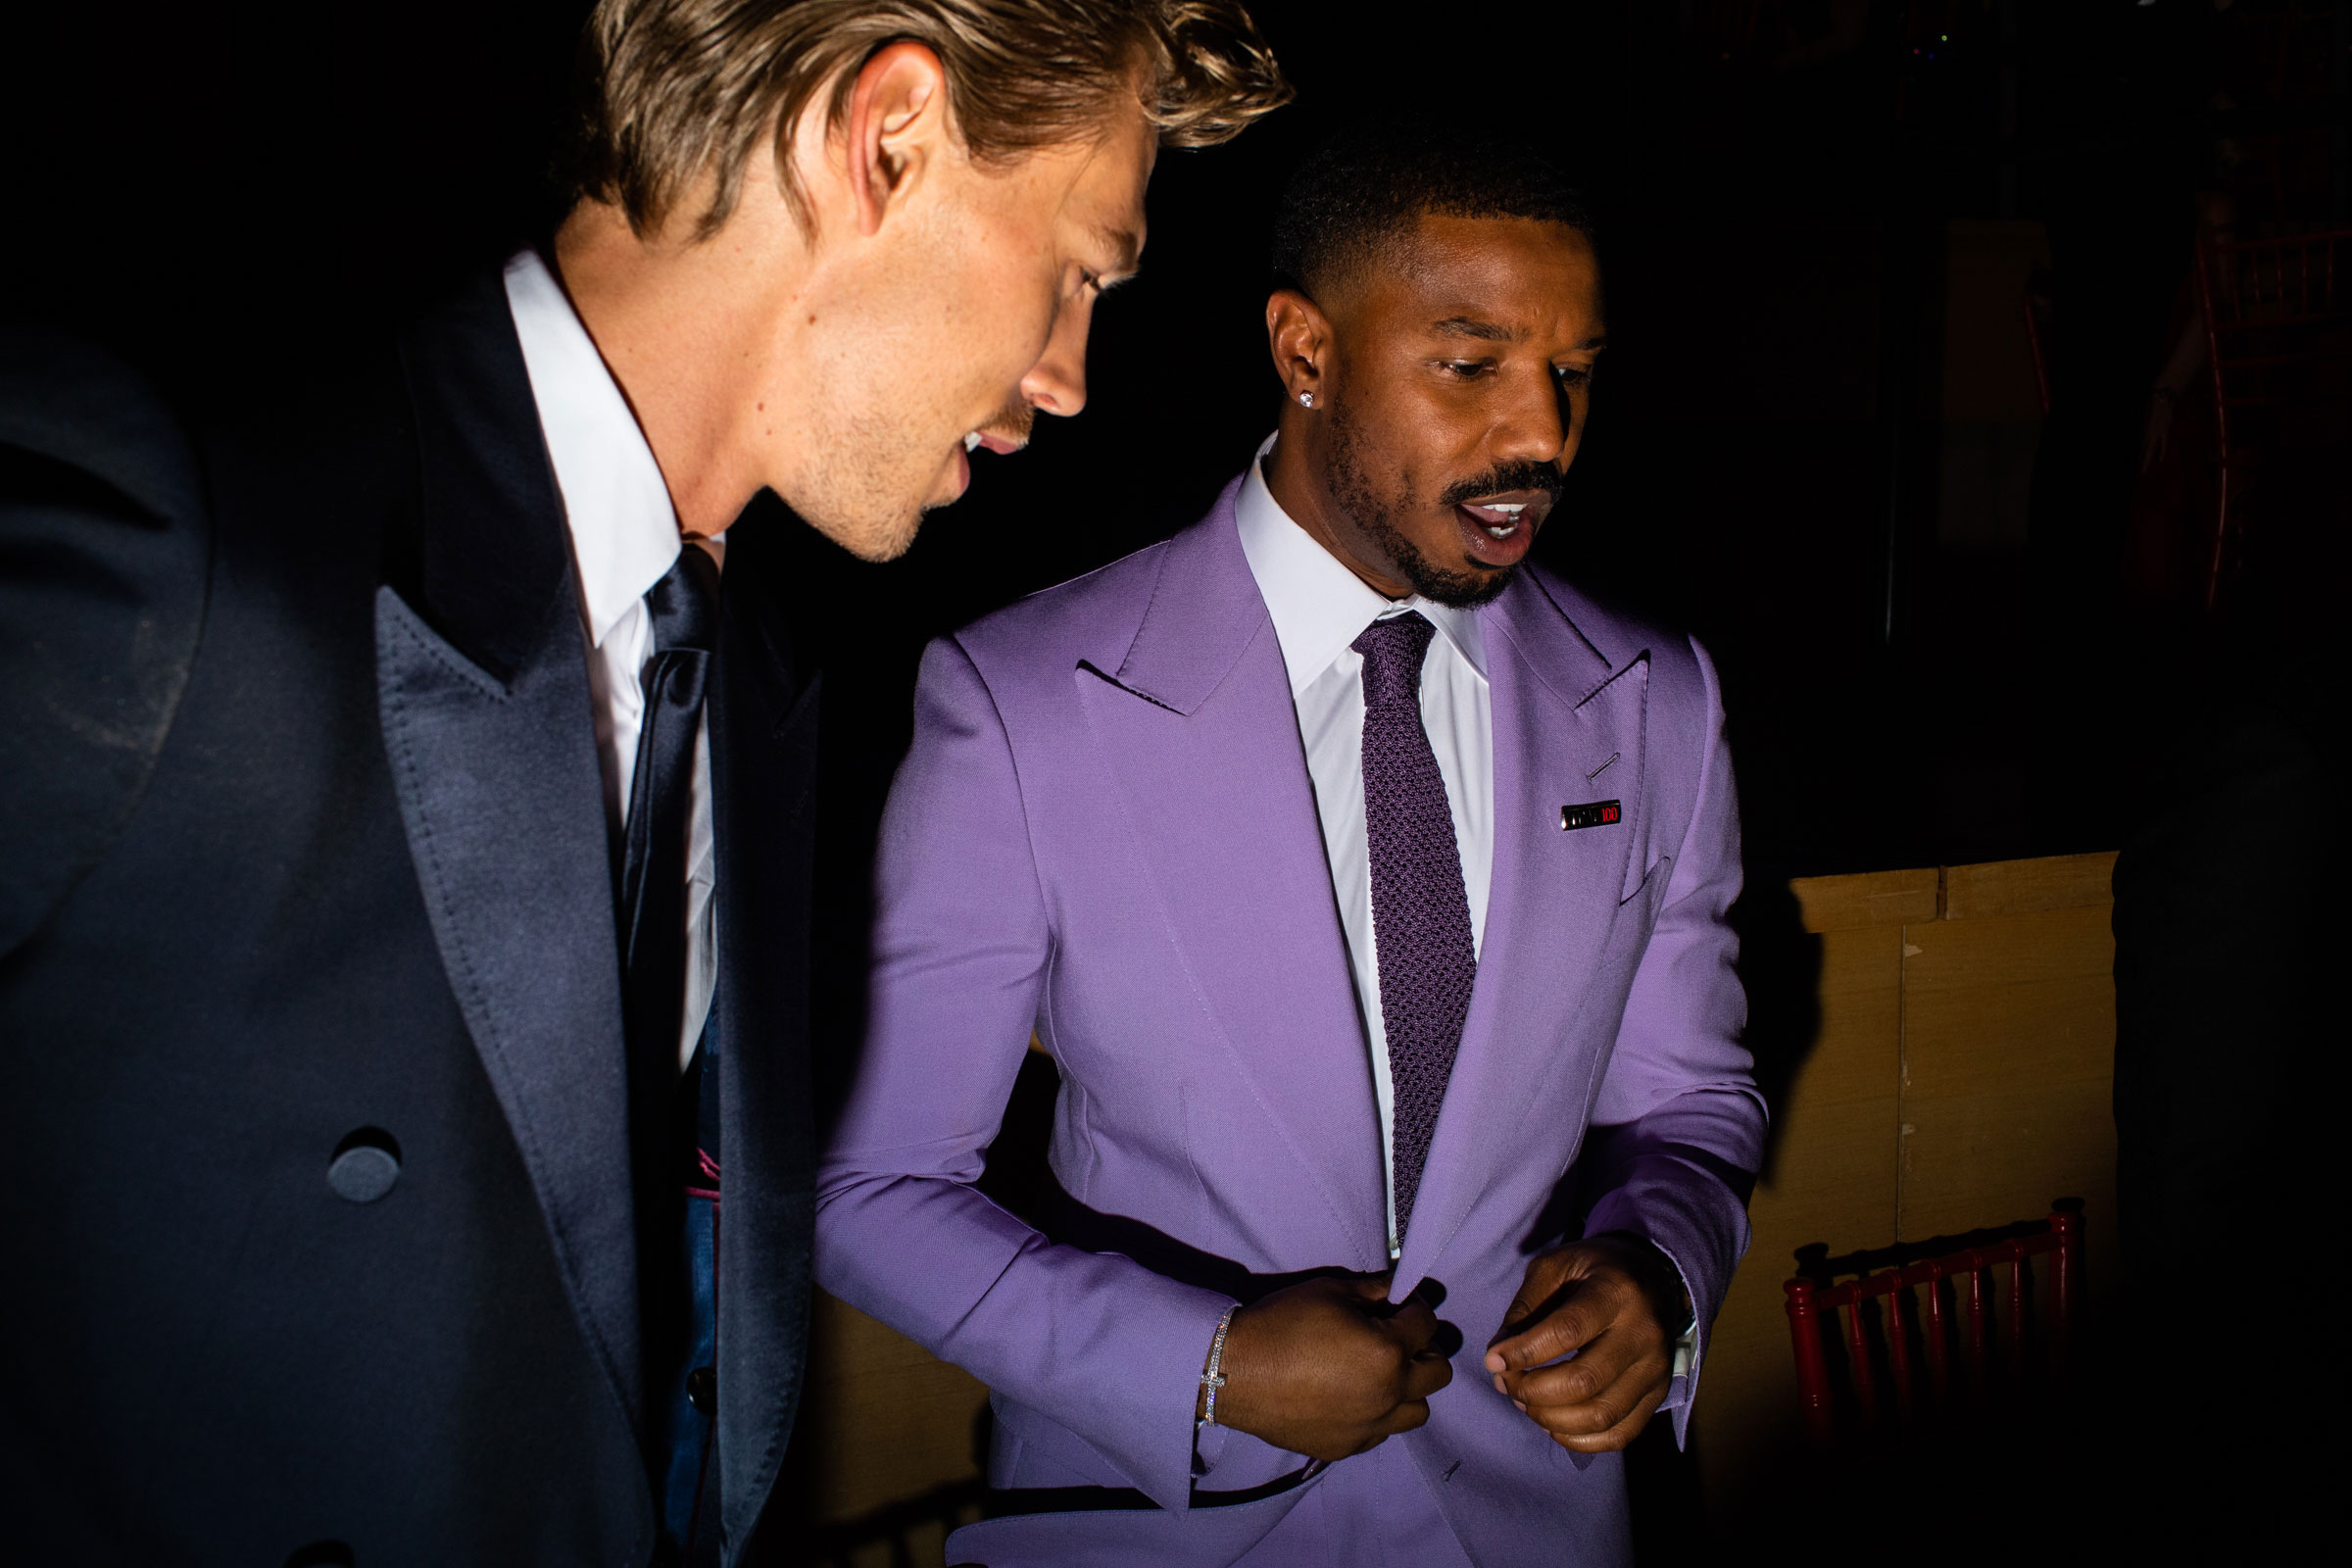 Austin Butler and Michael B. Jordan attend the TIME 100 Gala at Jazz at Lincoln Center in New York City, on April 26, 2023. (Landon Nordeman for TIME)